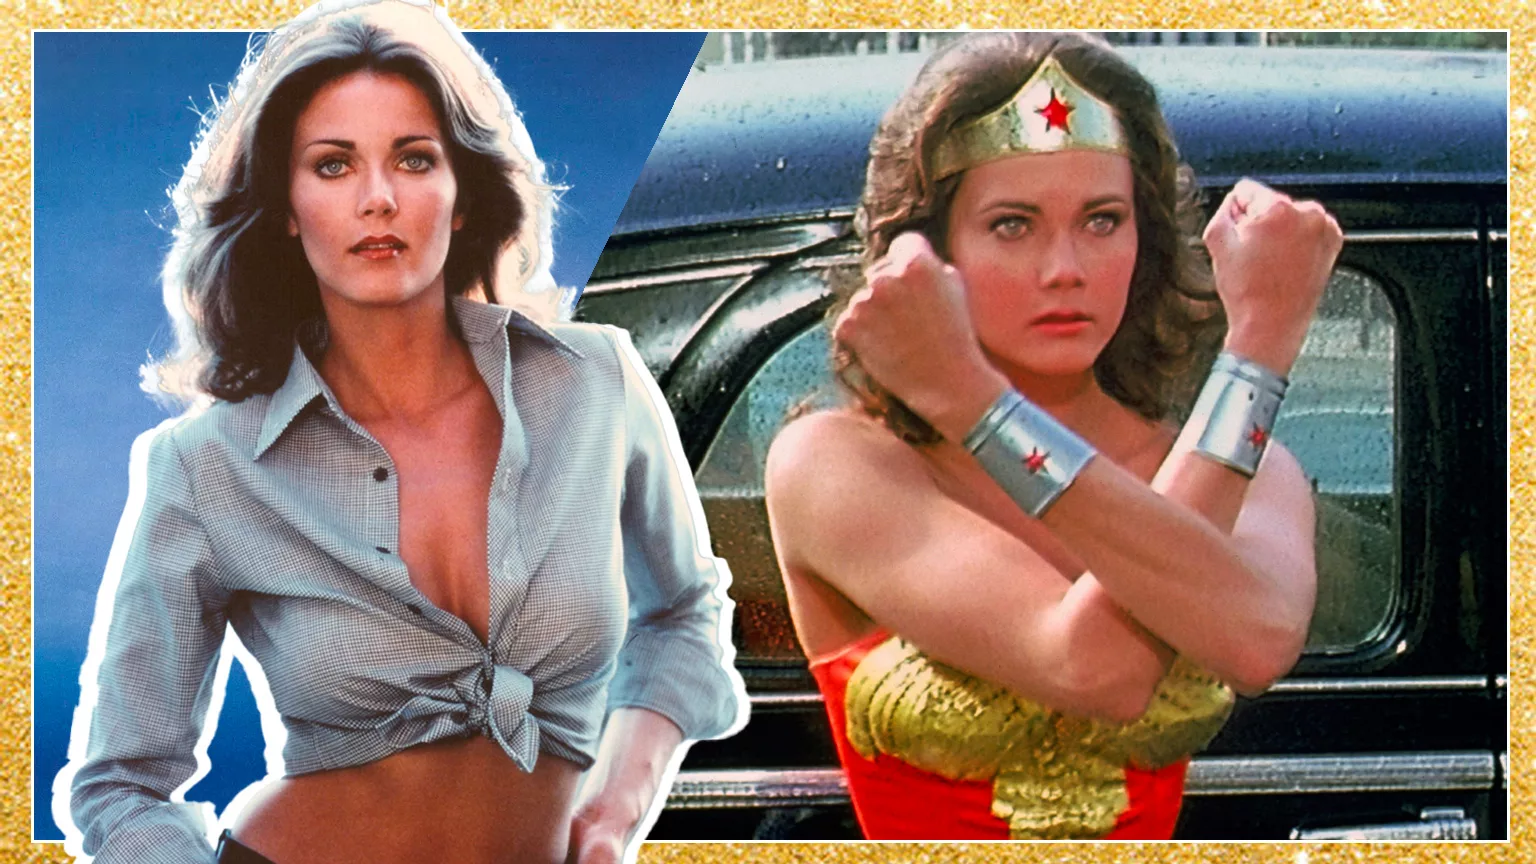 Lynda Carter Wonder Woman - The Most Beautiful Women Of The '70s and 80's